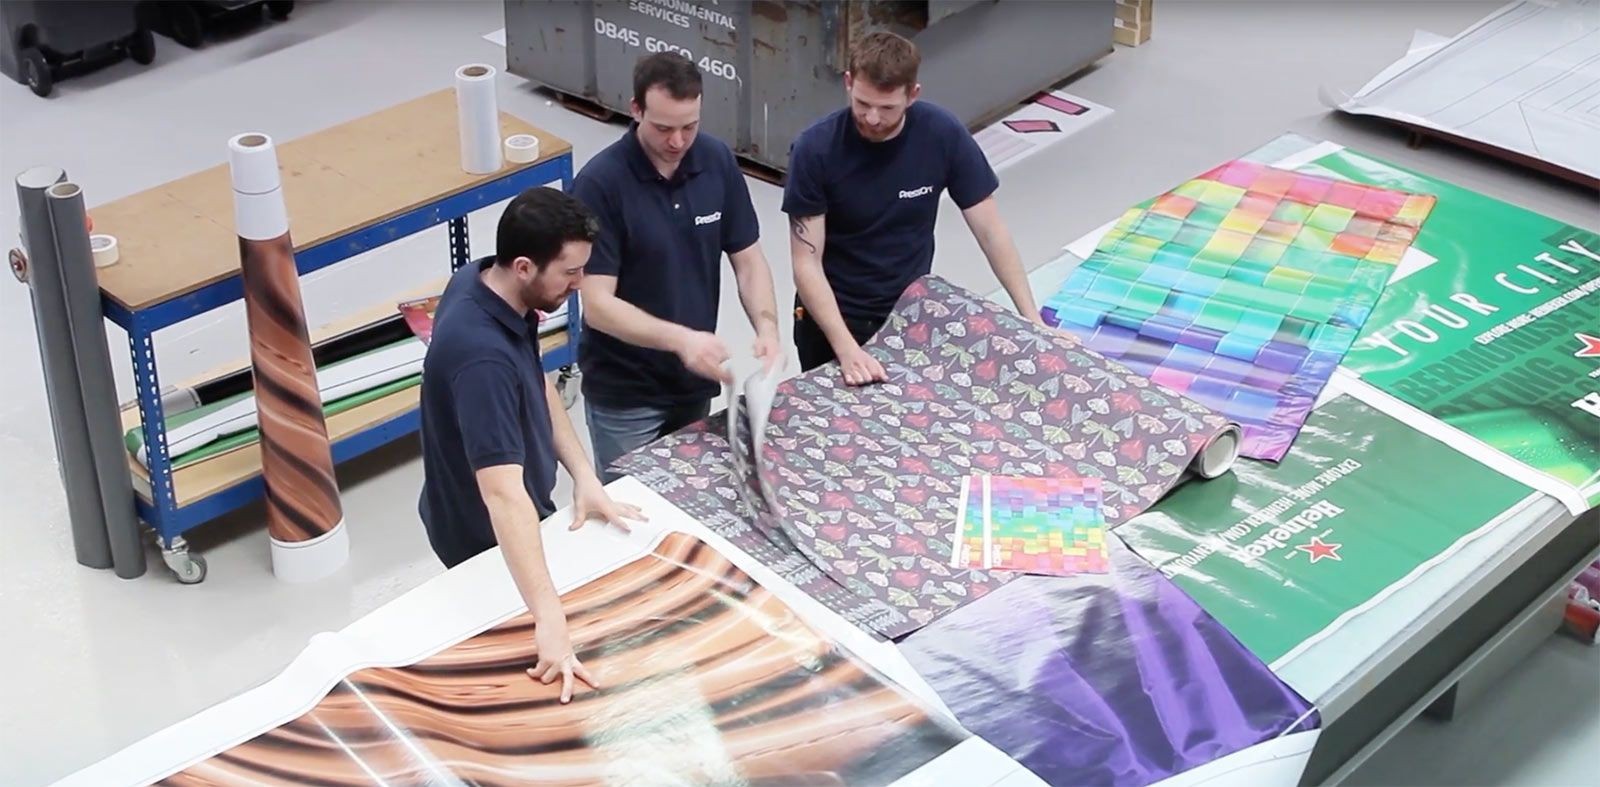 Large Format Printing Solutions for Small Businesses: Posters, Banners, and More